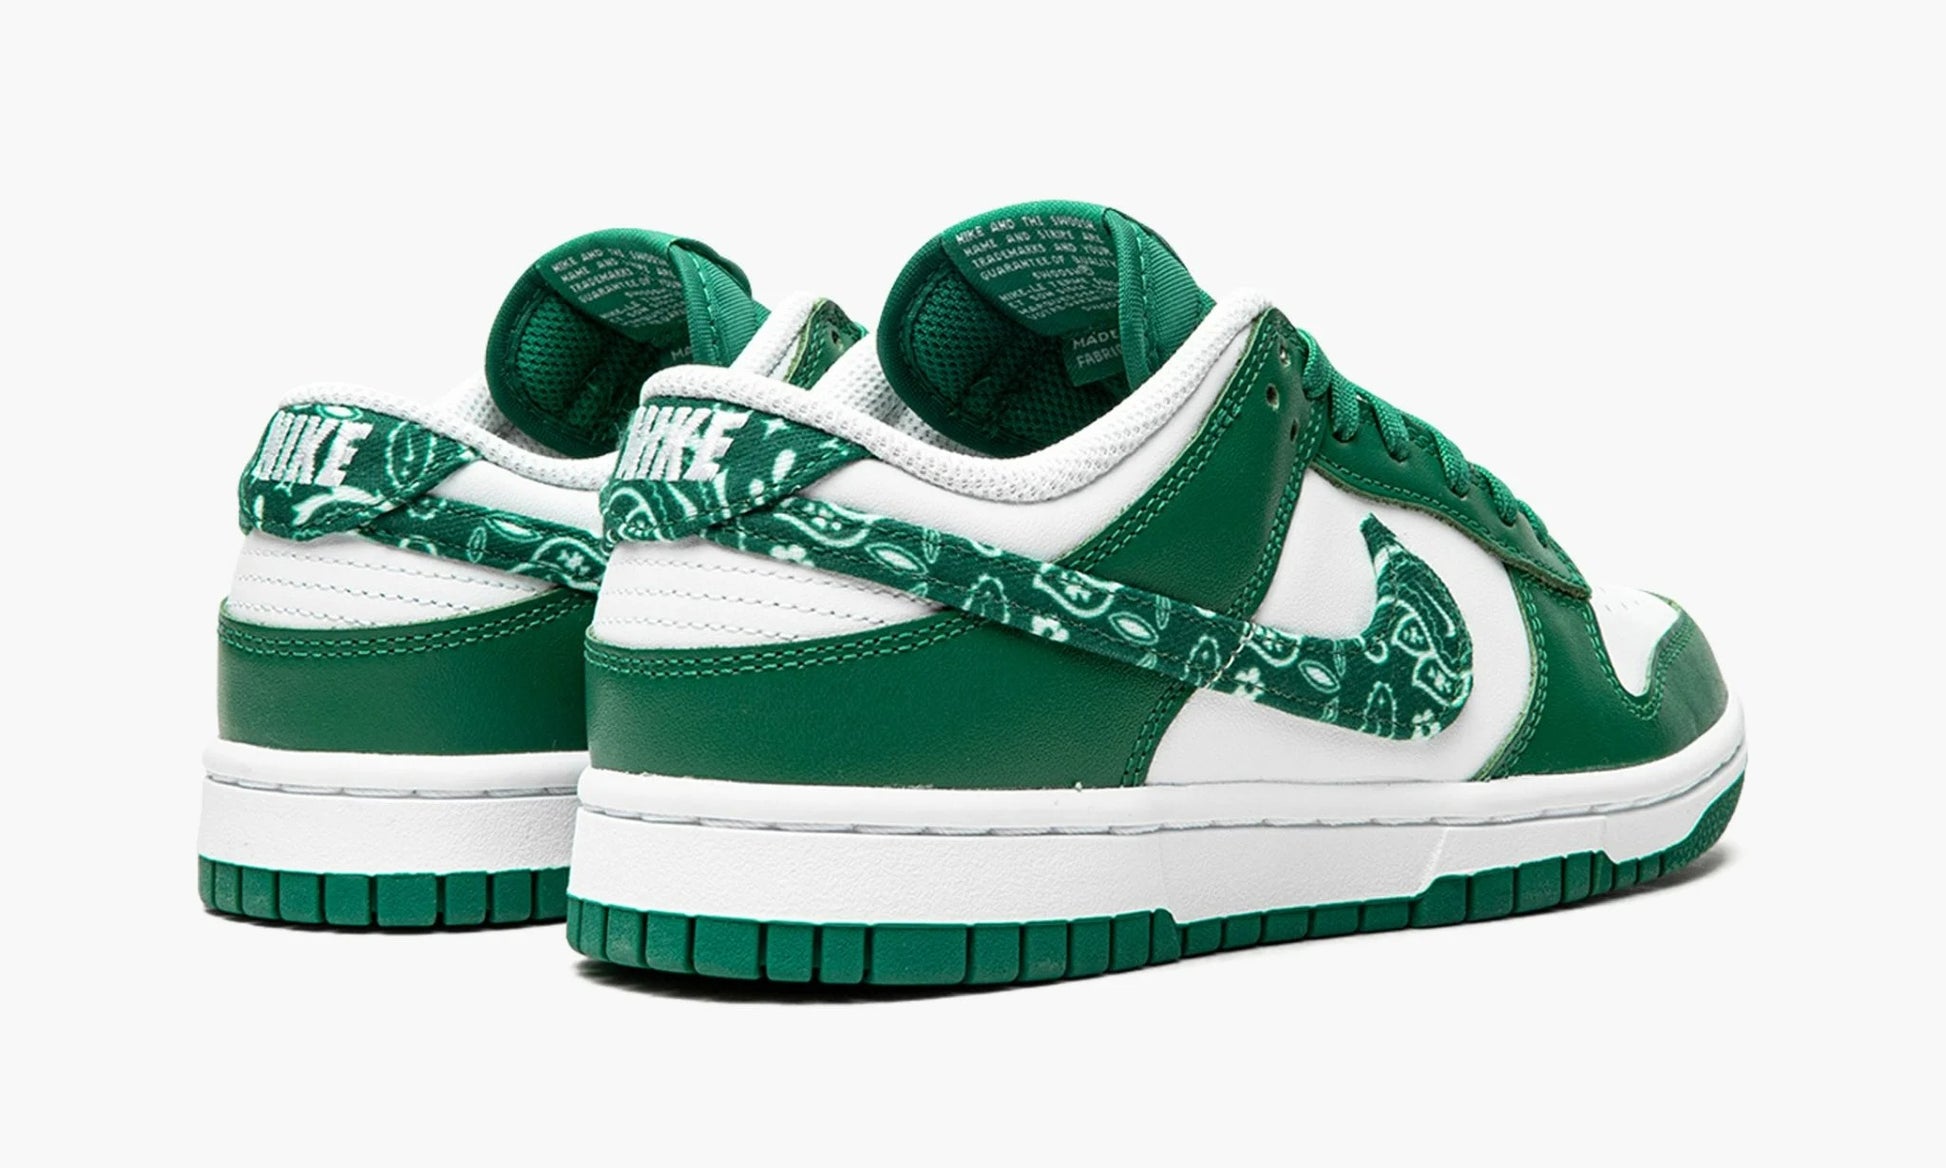 Dunk Low Essential WMNS Paisley Pack Green - DH4401 102 